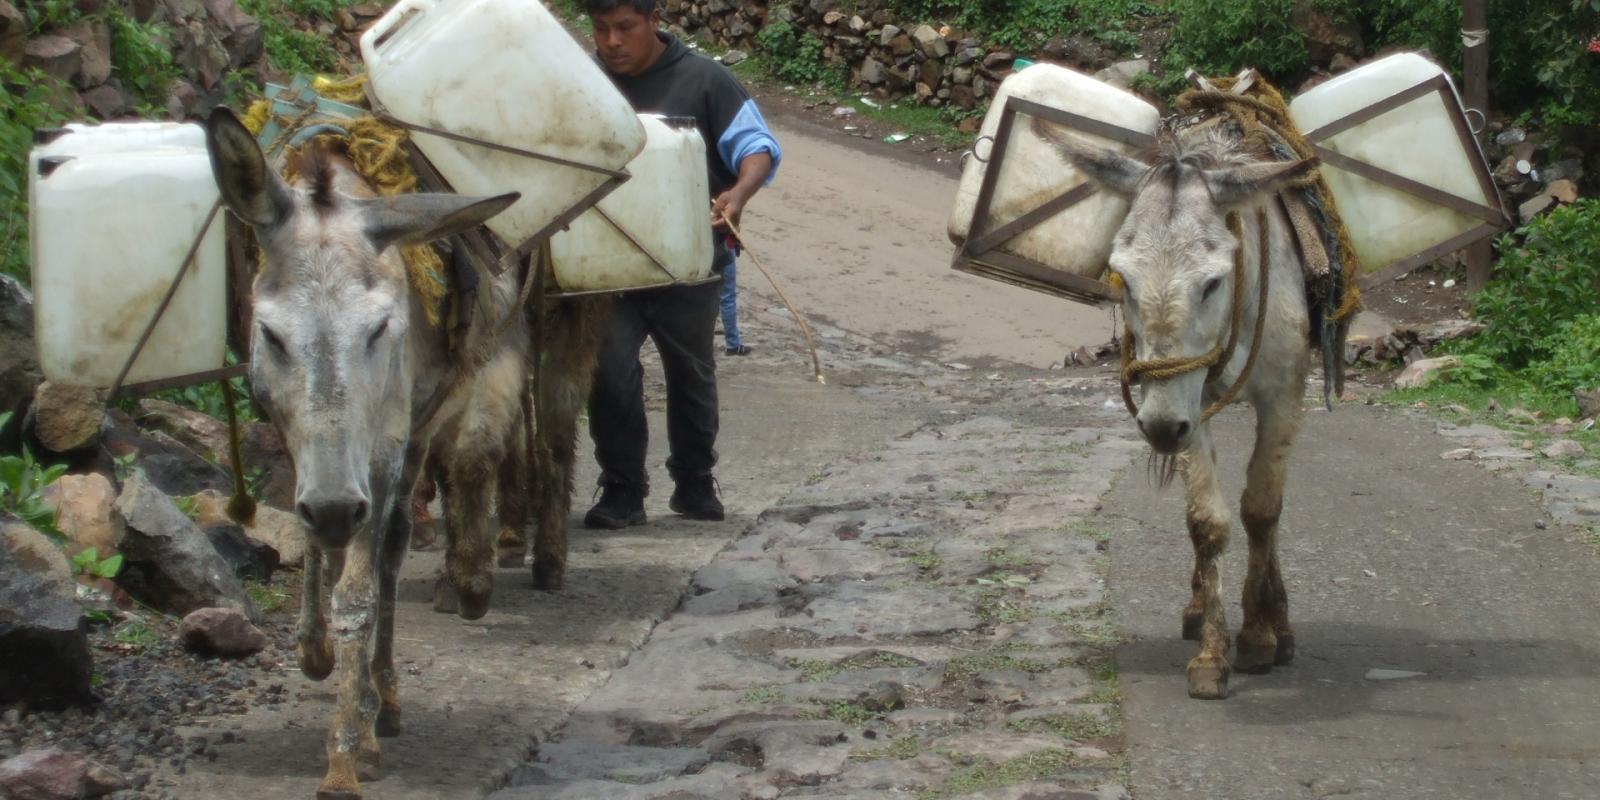 Donkey and mules are essential for transport